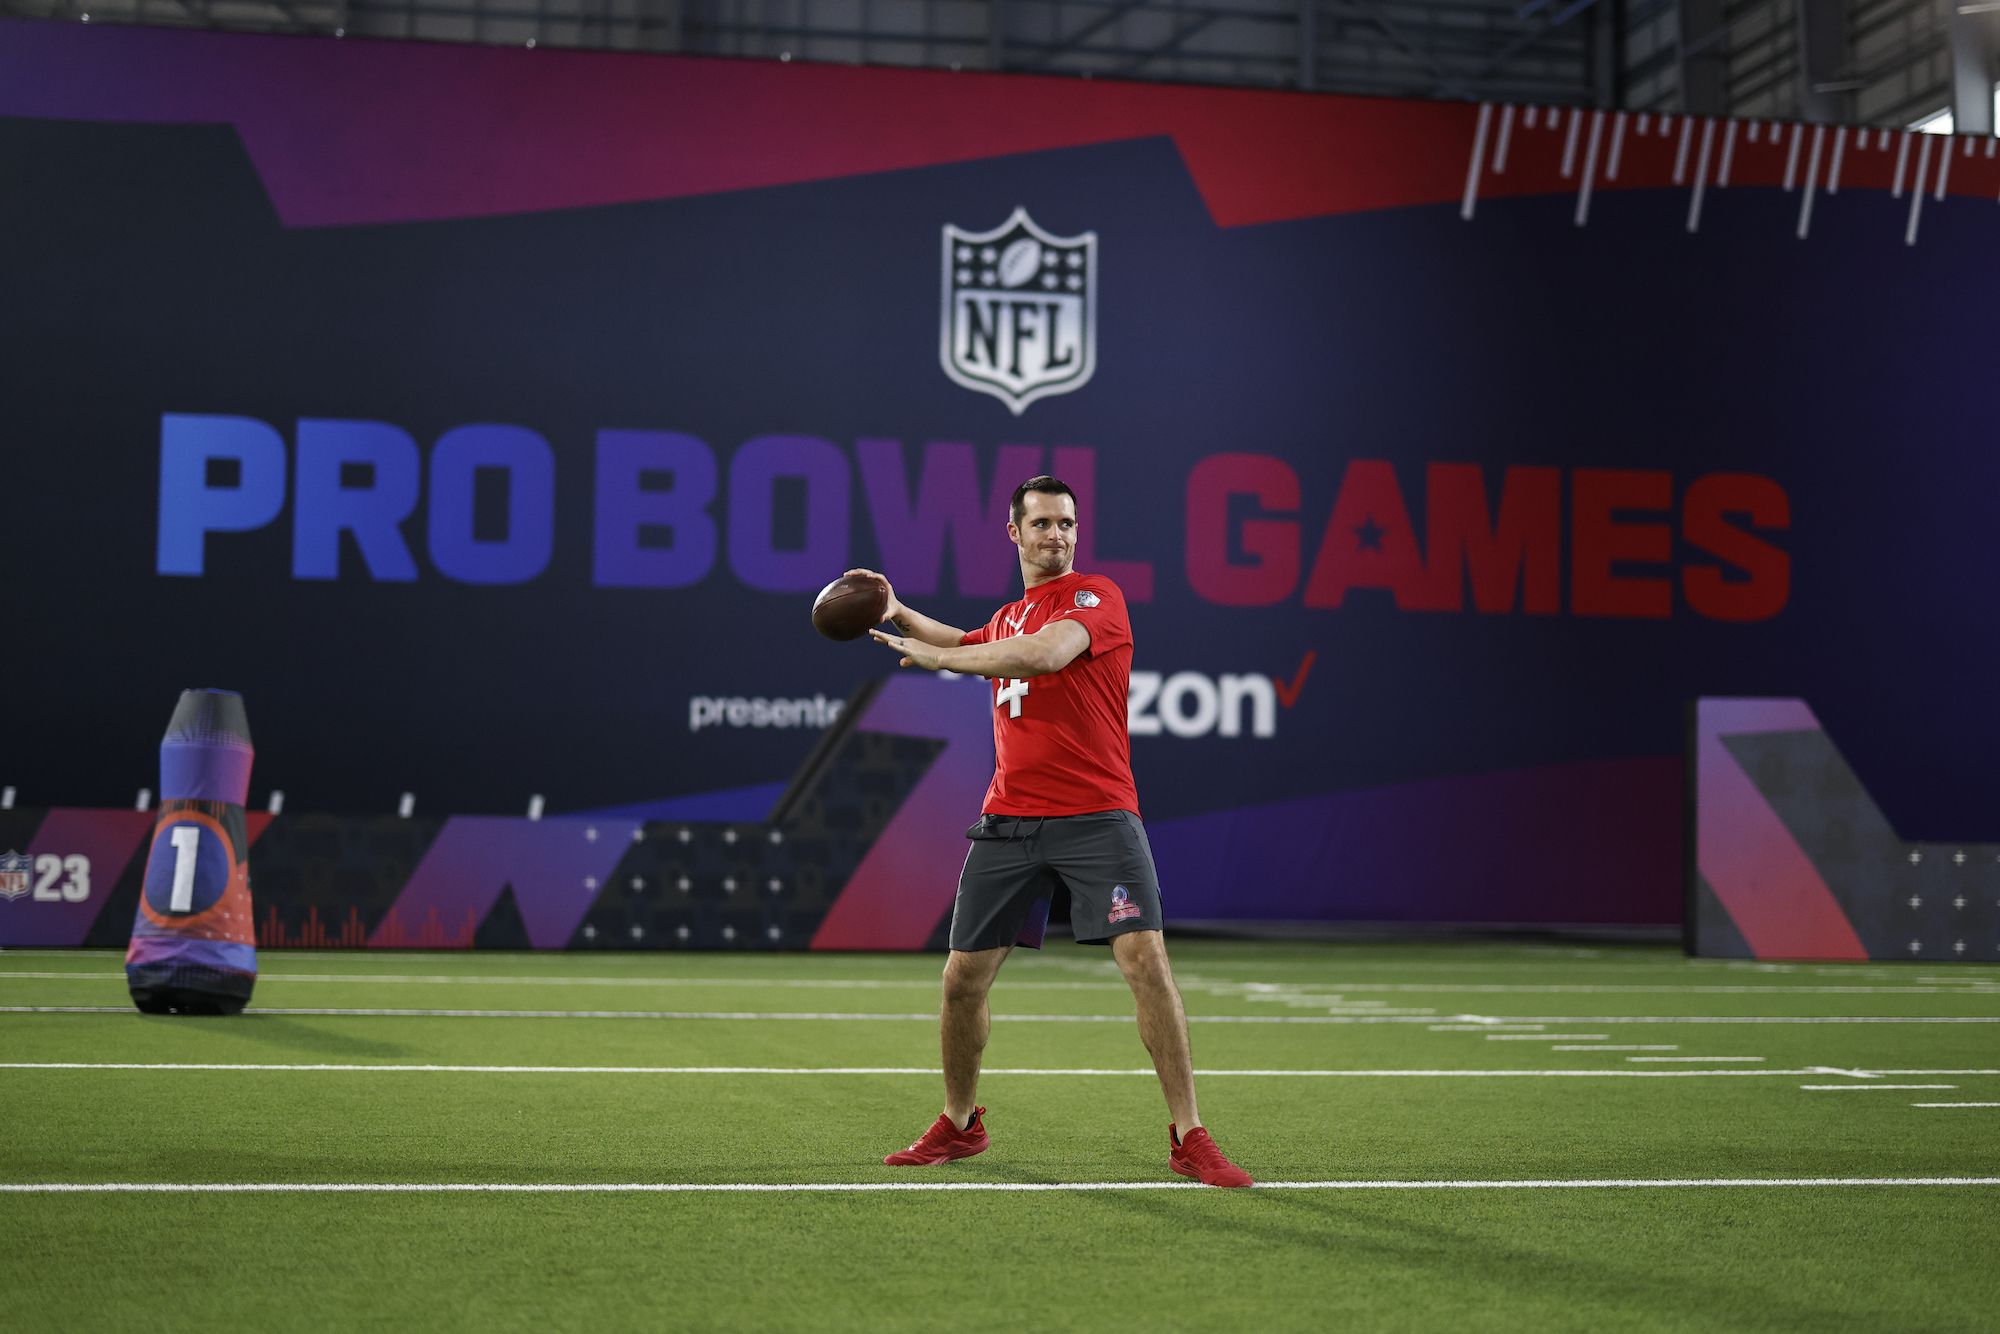 NFL Pro Bowl Games 2023 flag football and skills competition